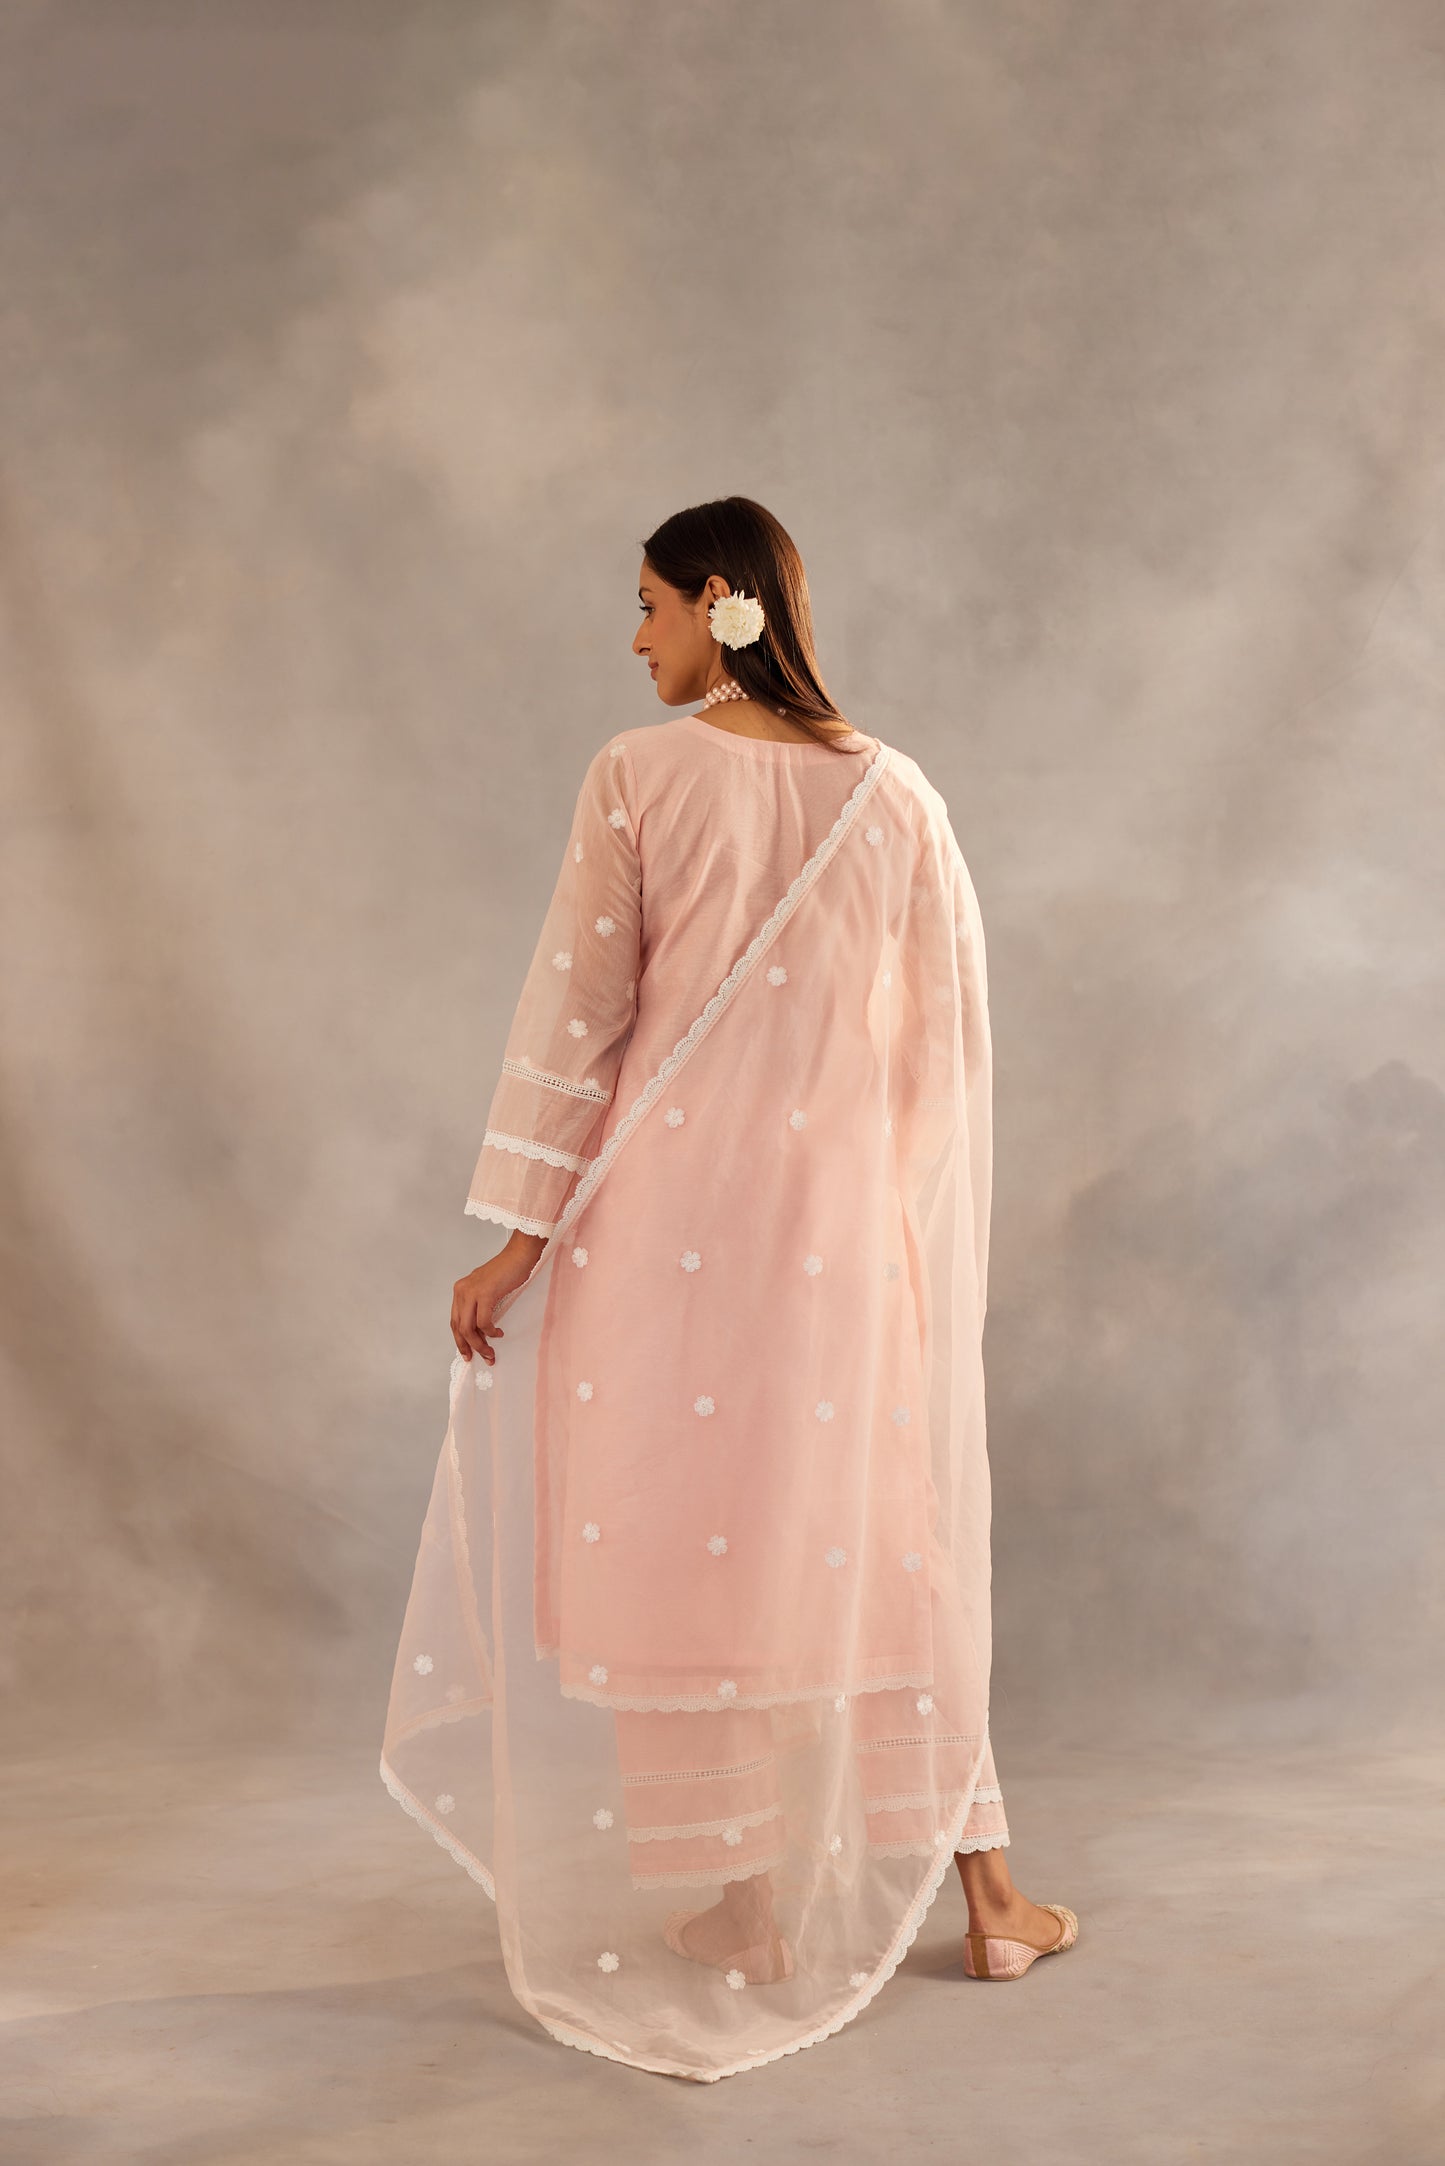 Gulbagh - Peach Embroidered Suit Set.